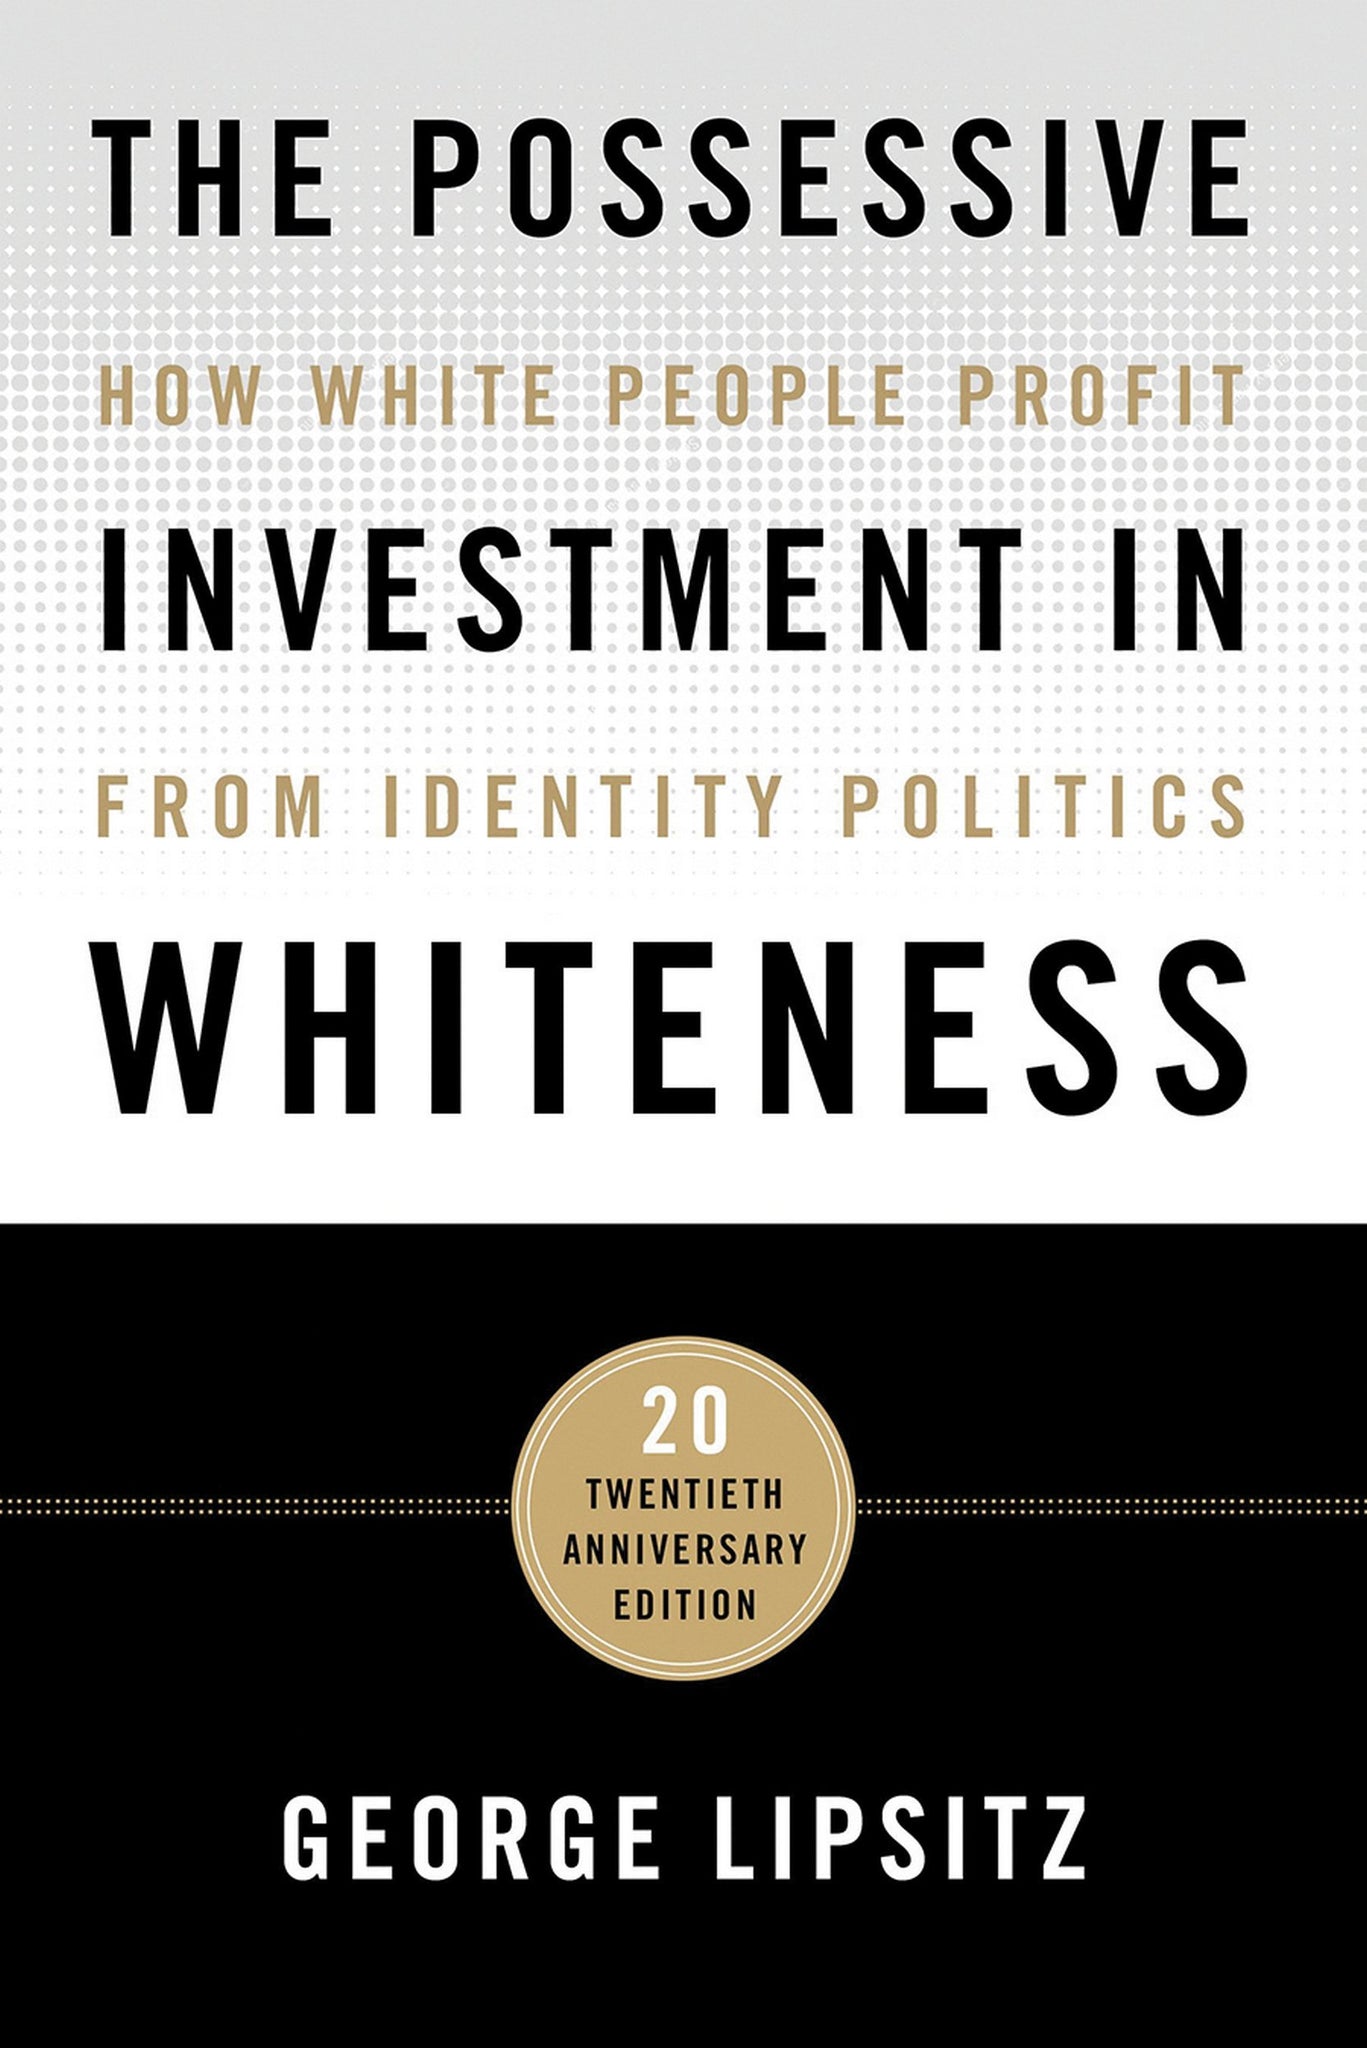 The Possessive Investment in Whiteness: How White People Profit from Identity Politics (Paperback)